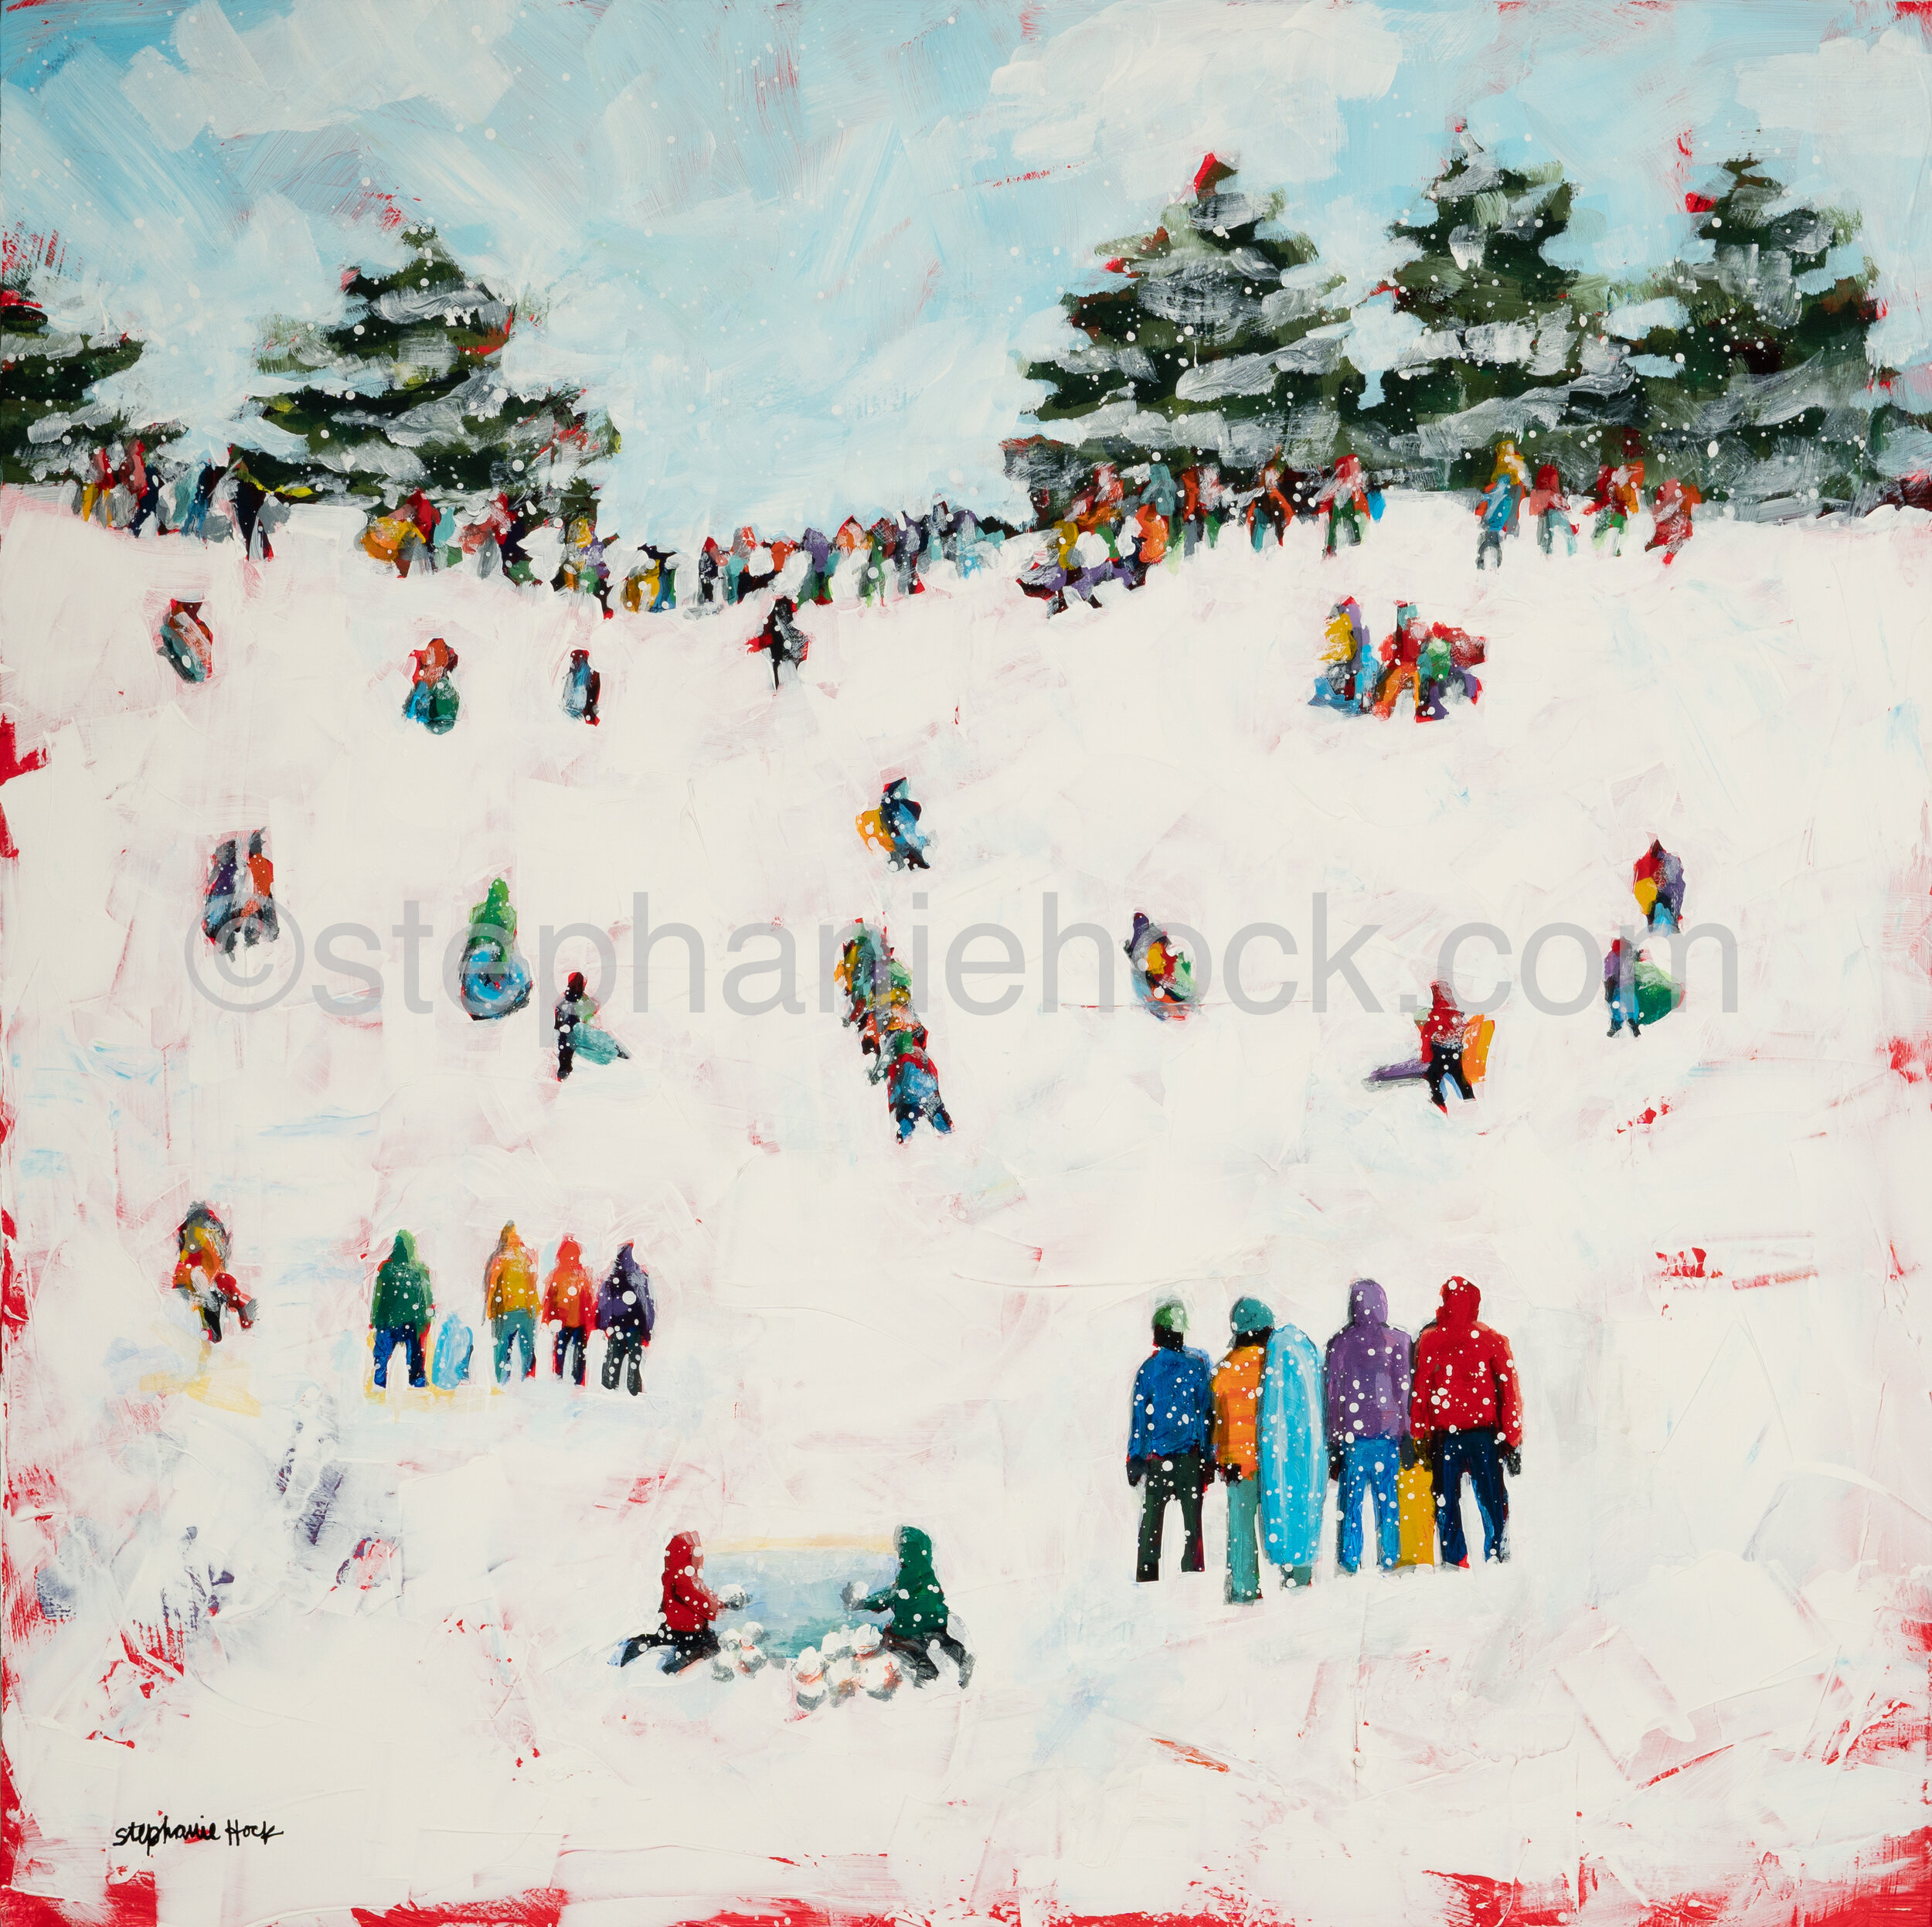 2089 Playing in the Snow 20x20.jpg